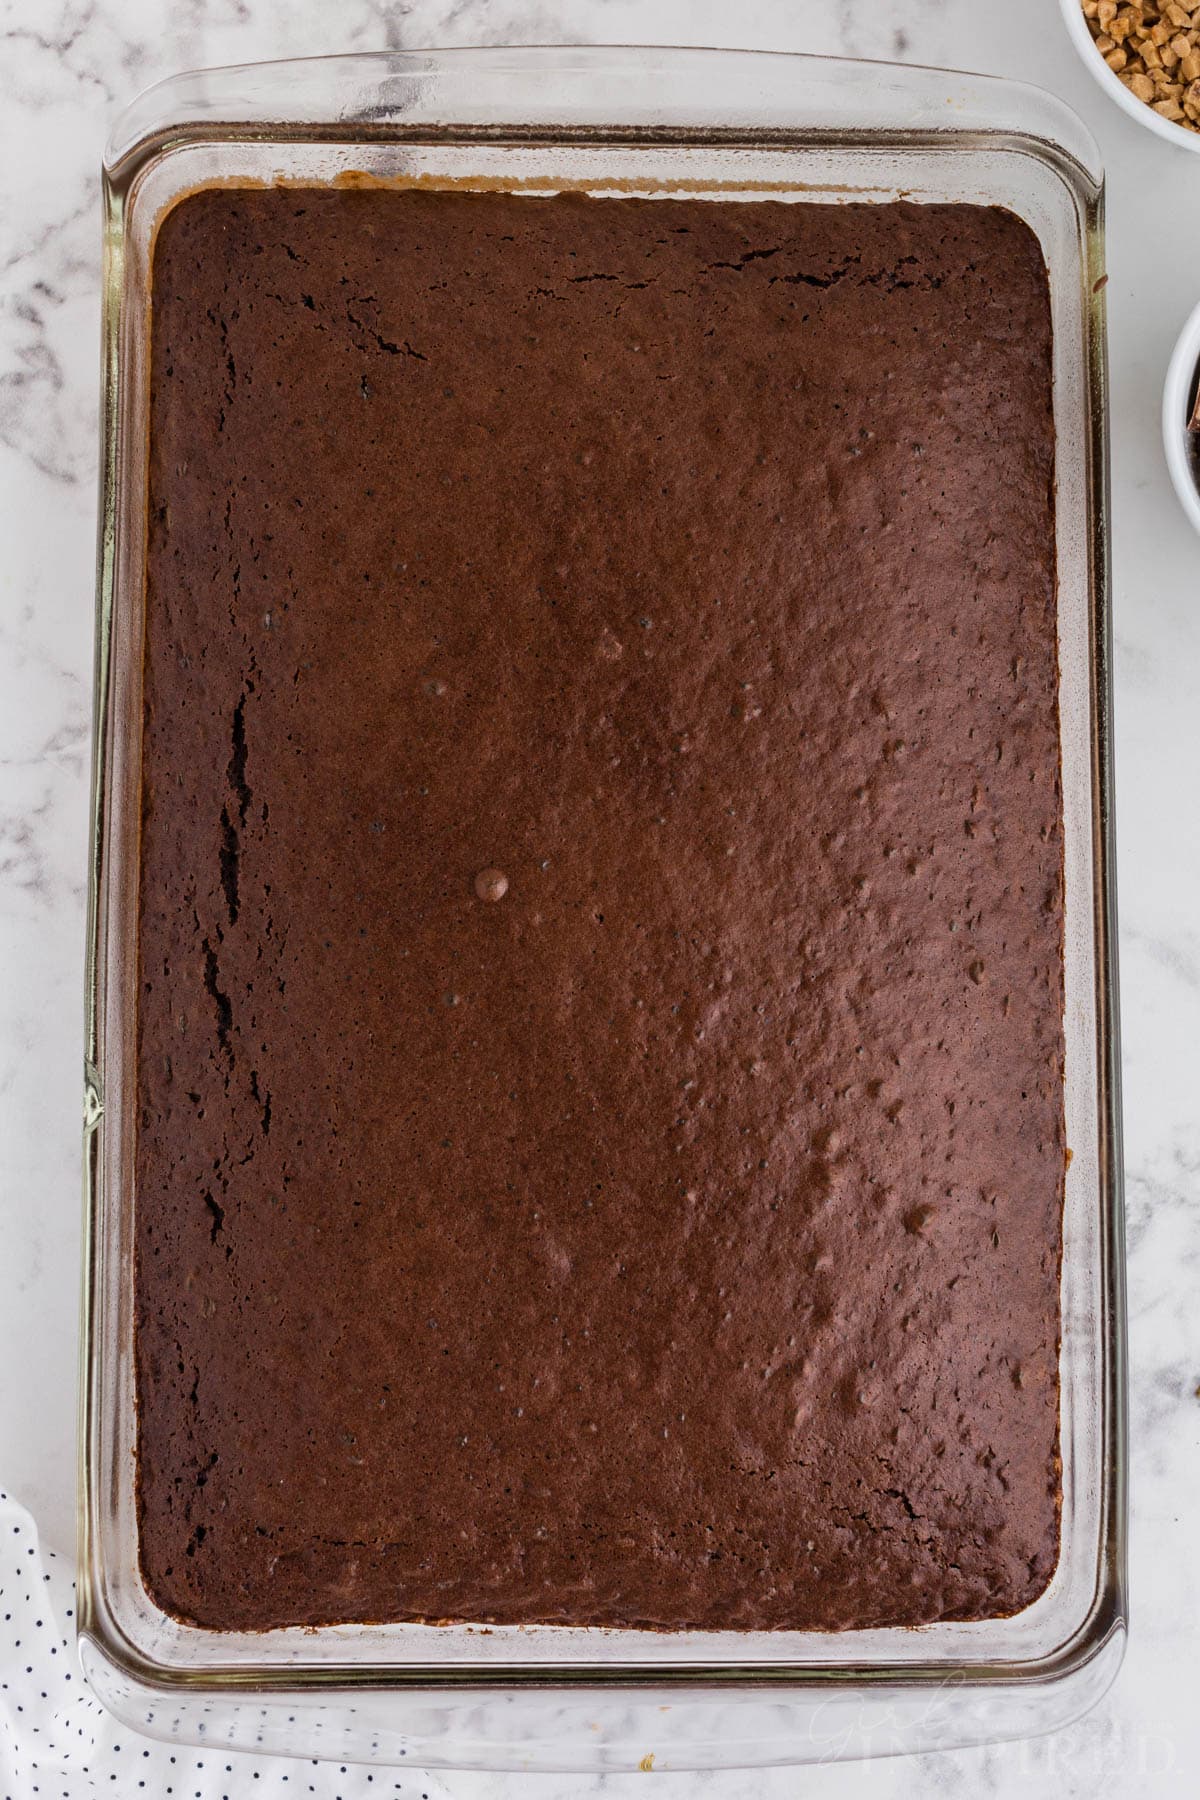 Baked chocolate cake base in a glass baking dish on a countertop. 